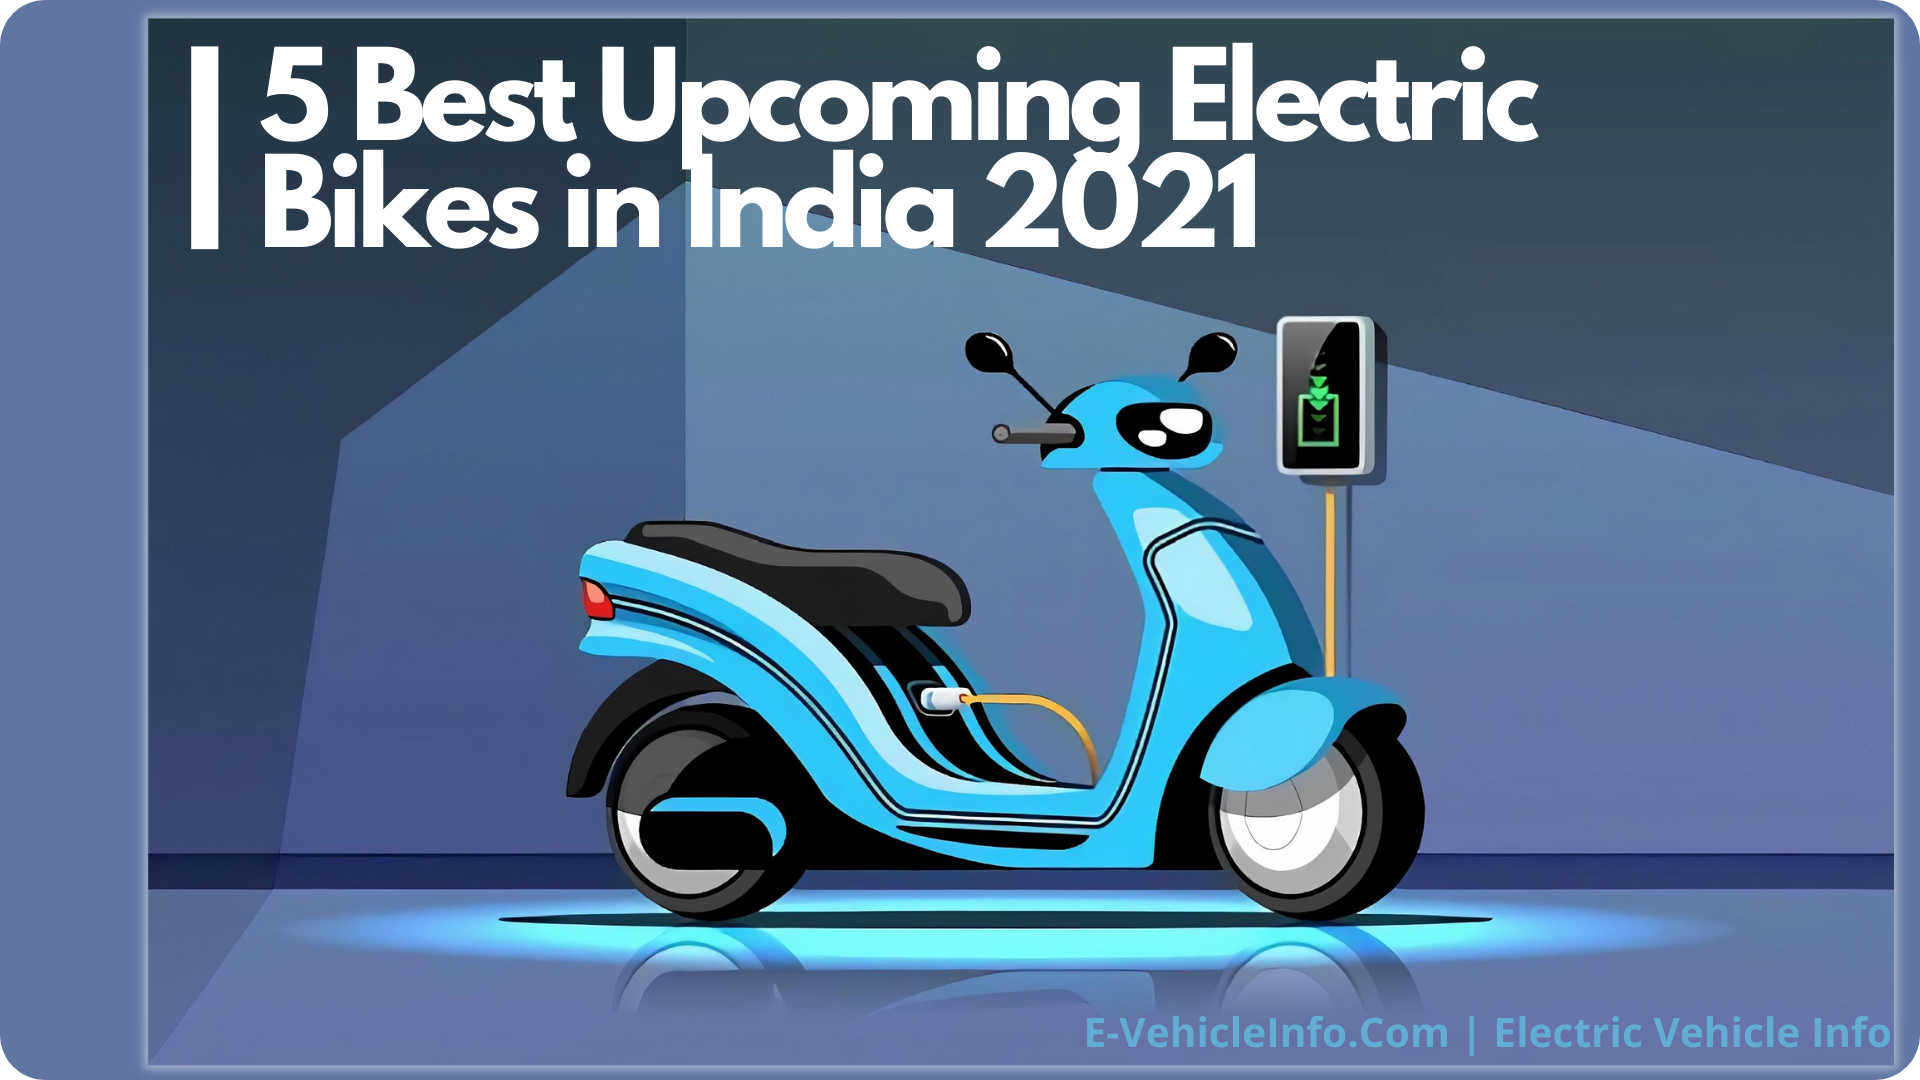 https://e-vehicleinfo.com/5-best-upcoming-electric-bikes-in-india/